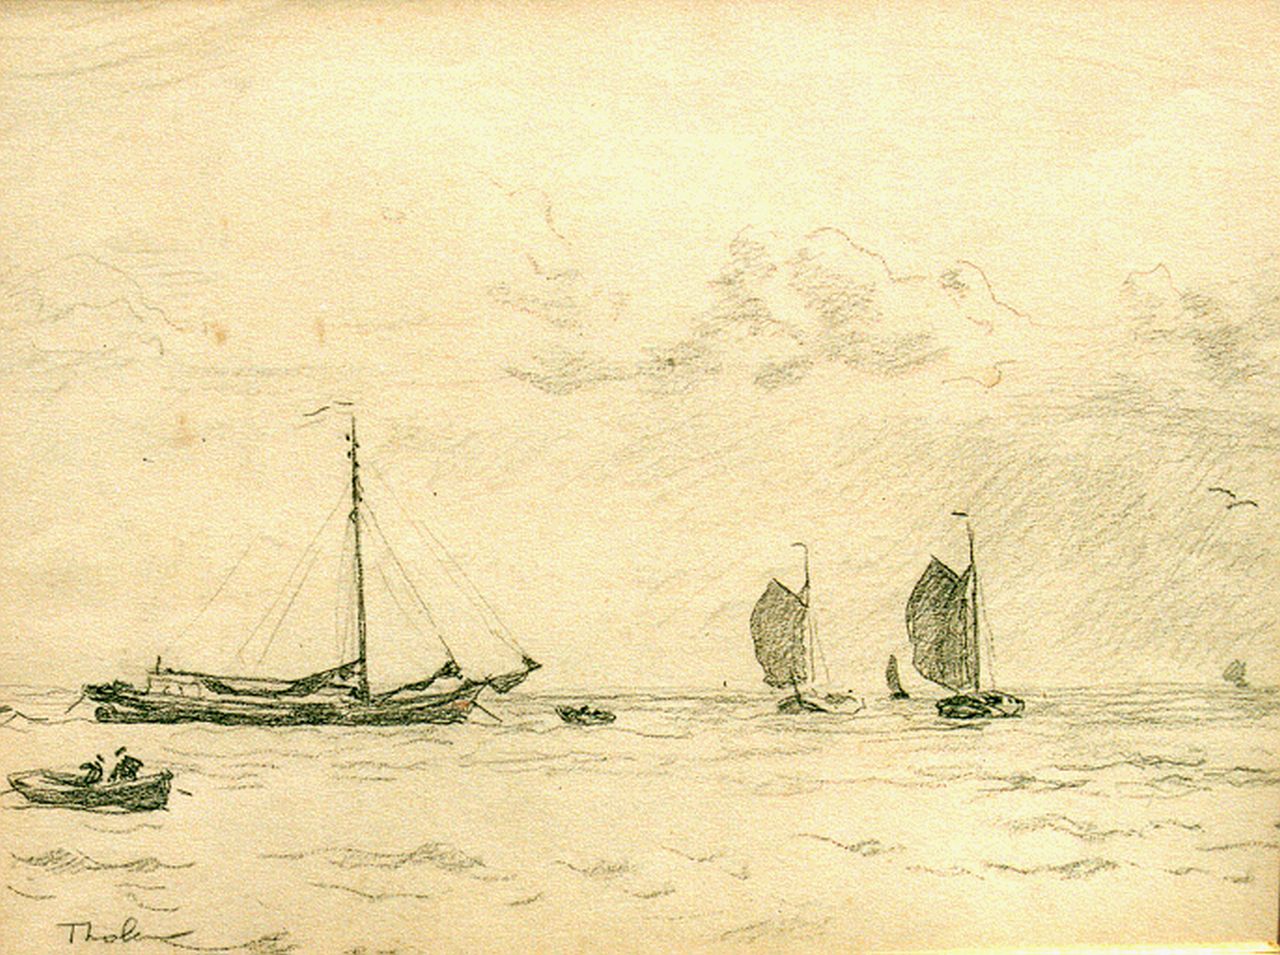 Tholen W.B.  | Willem Bastiaan Tholen, Shipping on the Zuiderzee, pencil on paper 22.5 x 30.0 cm, signed l.l.